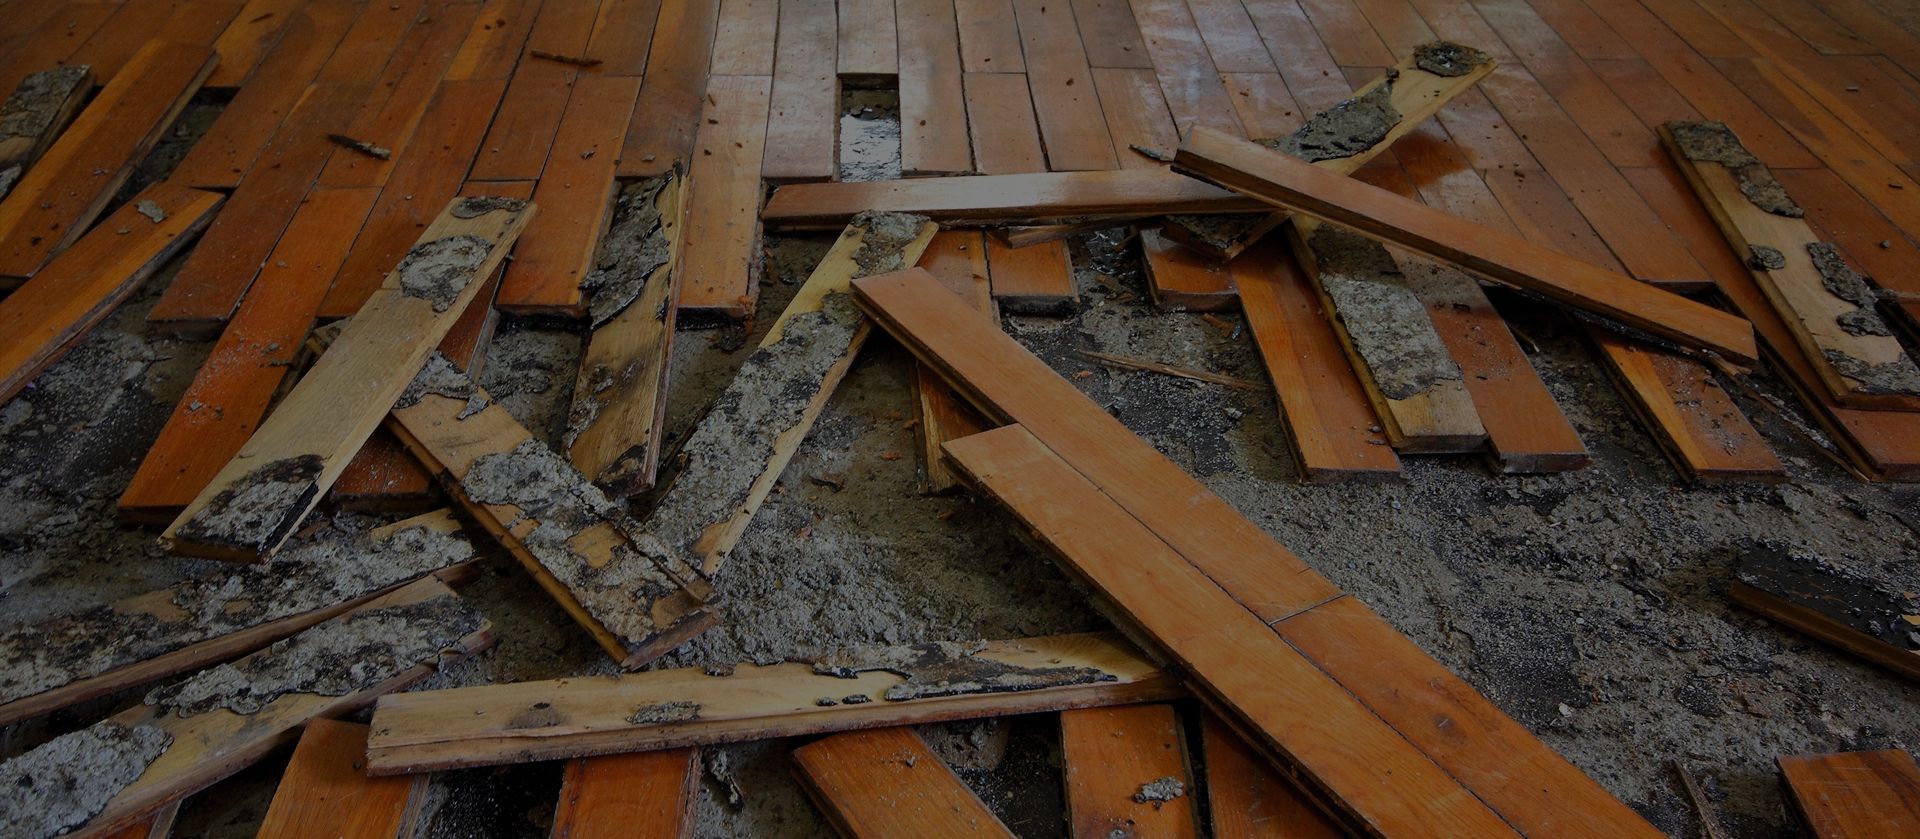 A pile of broken wooden boards on a wooden floor.